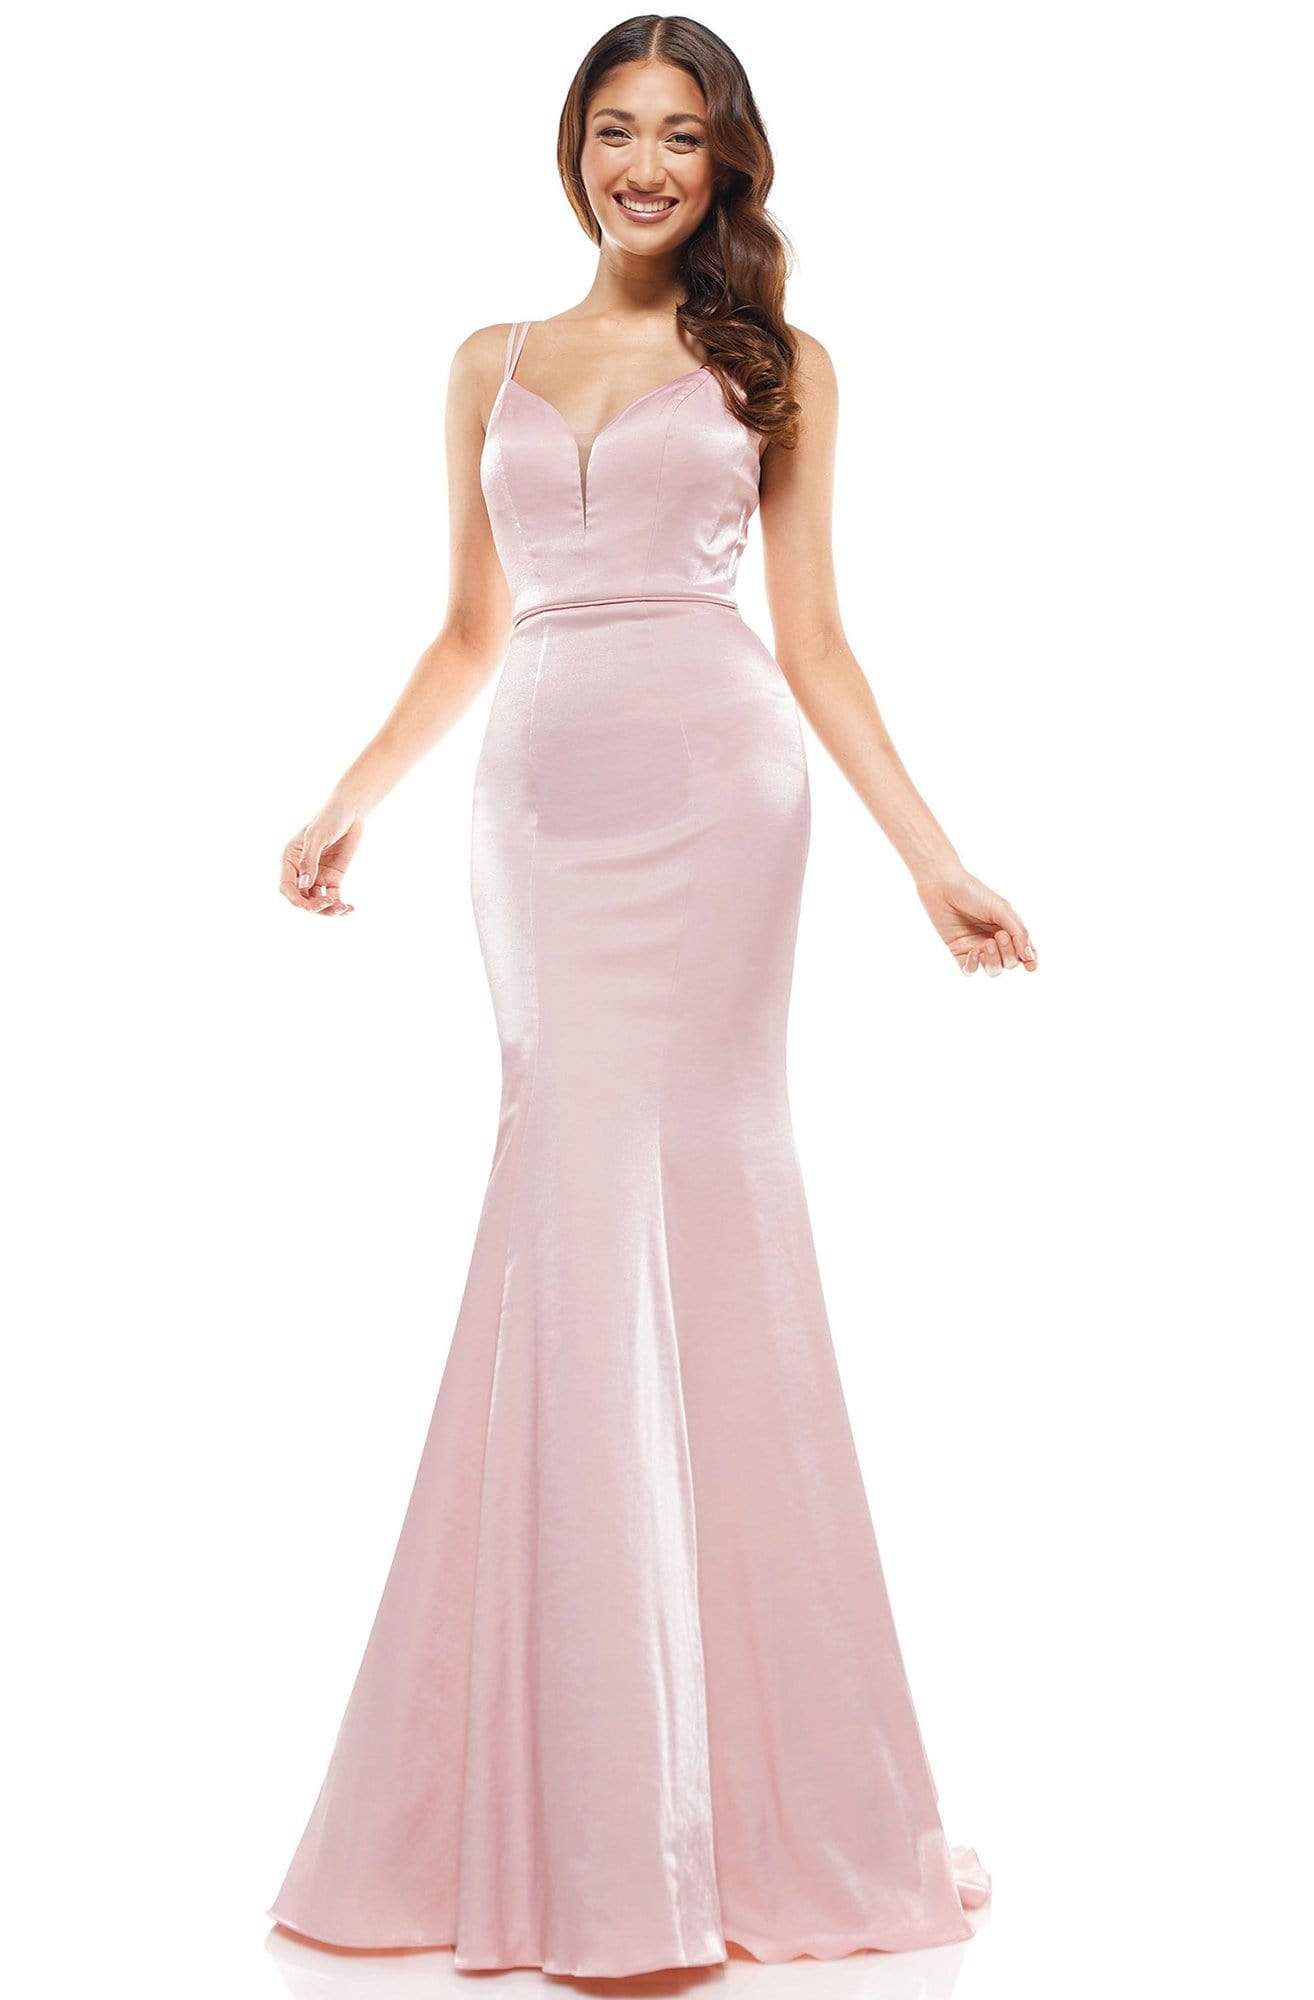 Glow Dress - G926 Sleeveless Double Strap Satin Mermaid Gown Prom Dresses 0 / Pink